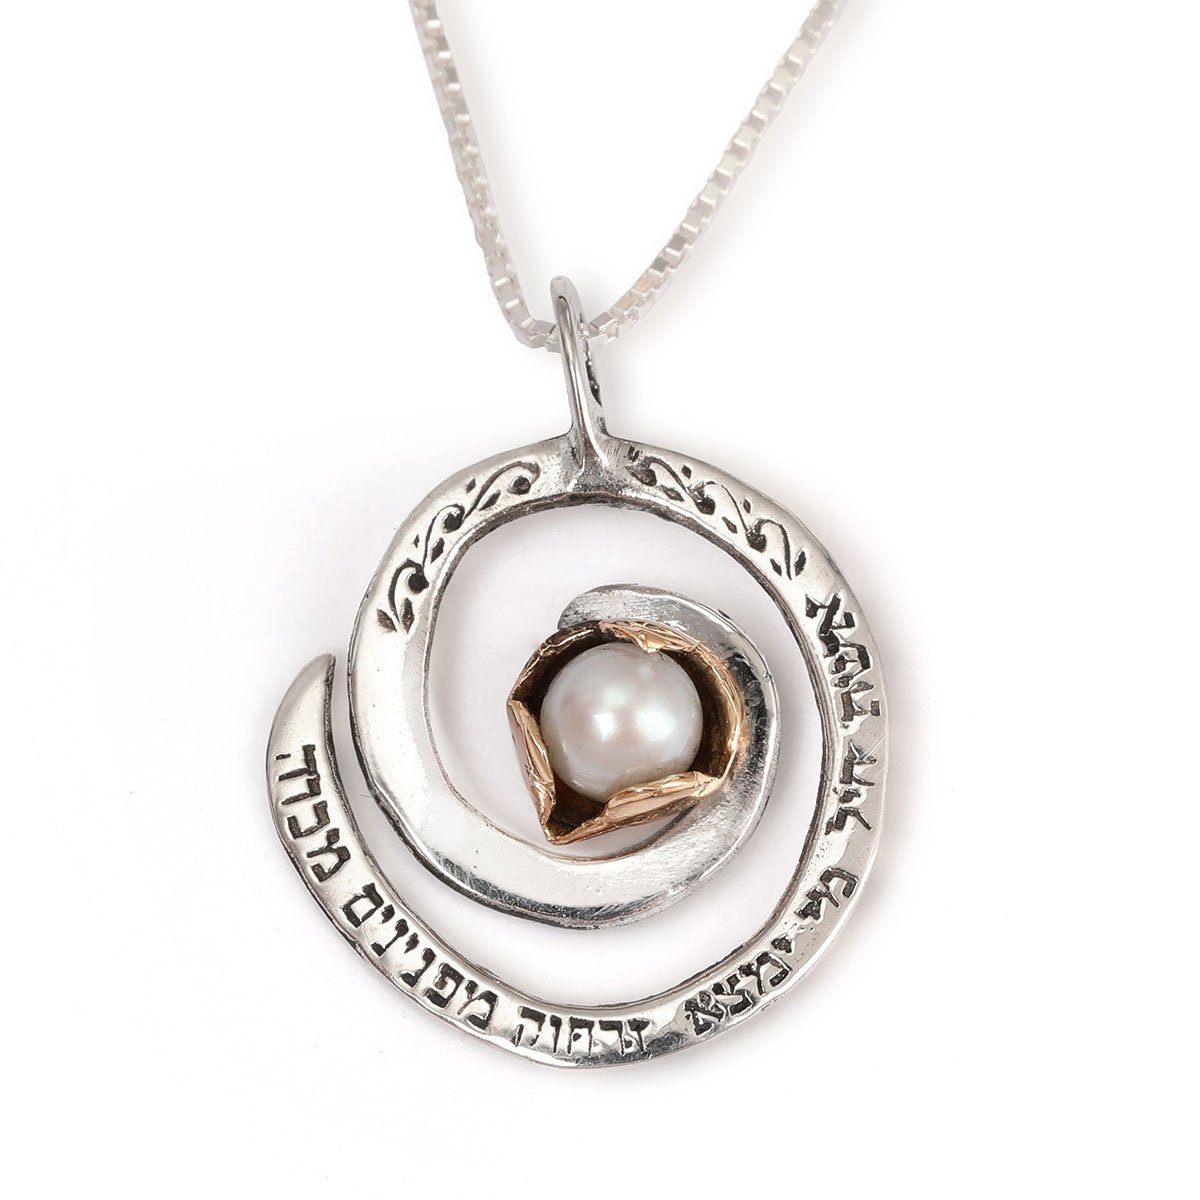 Beautiful Woman of Valor Gifts for the Special Woman in Your Life